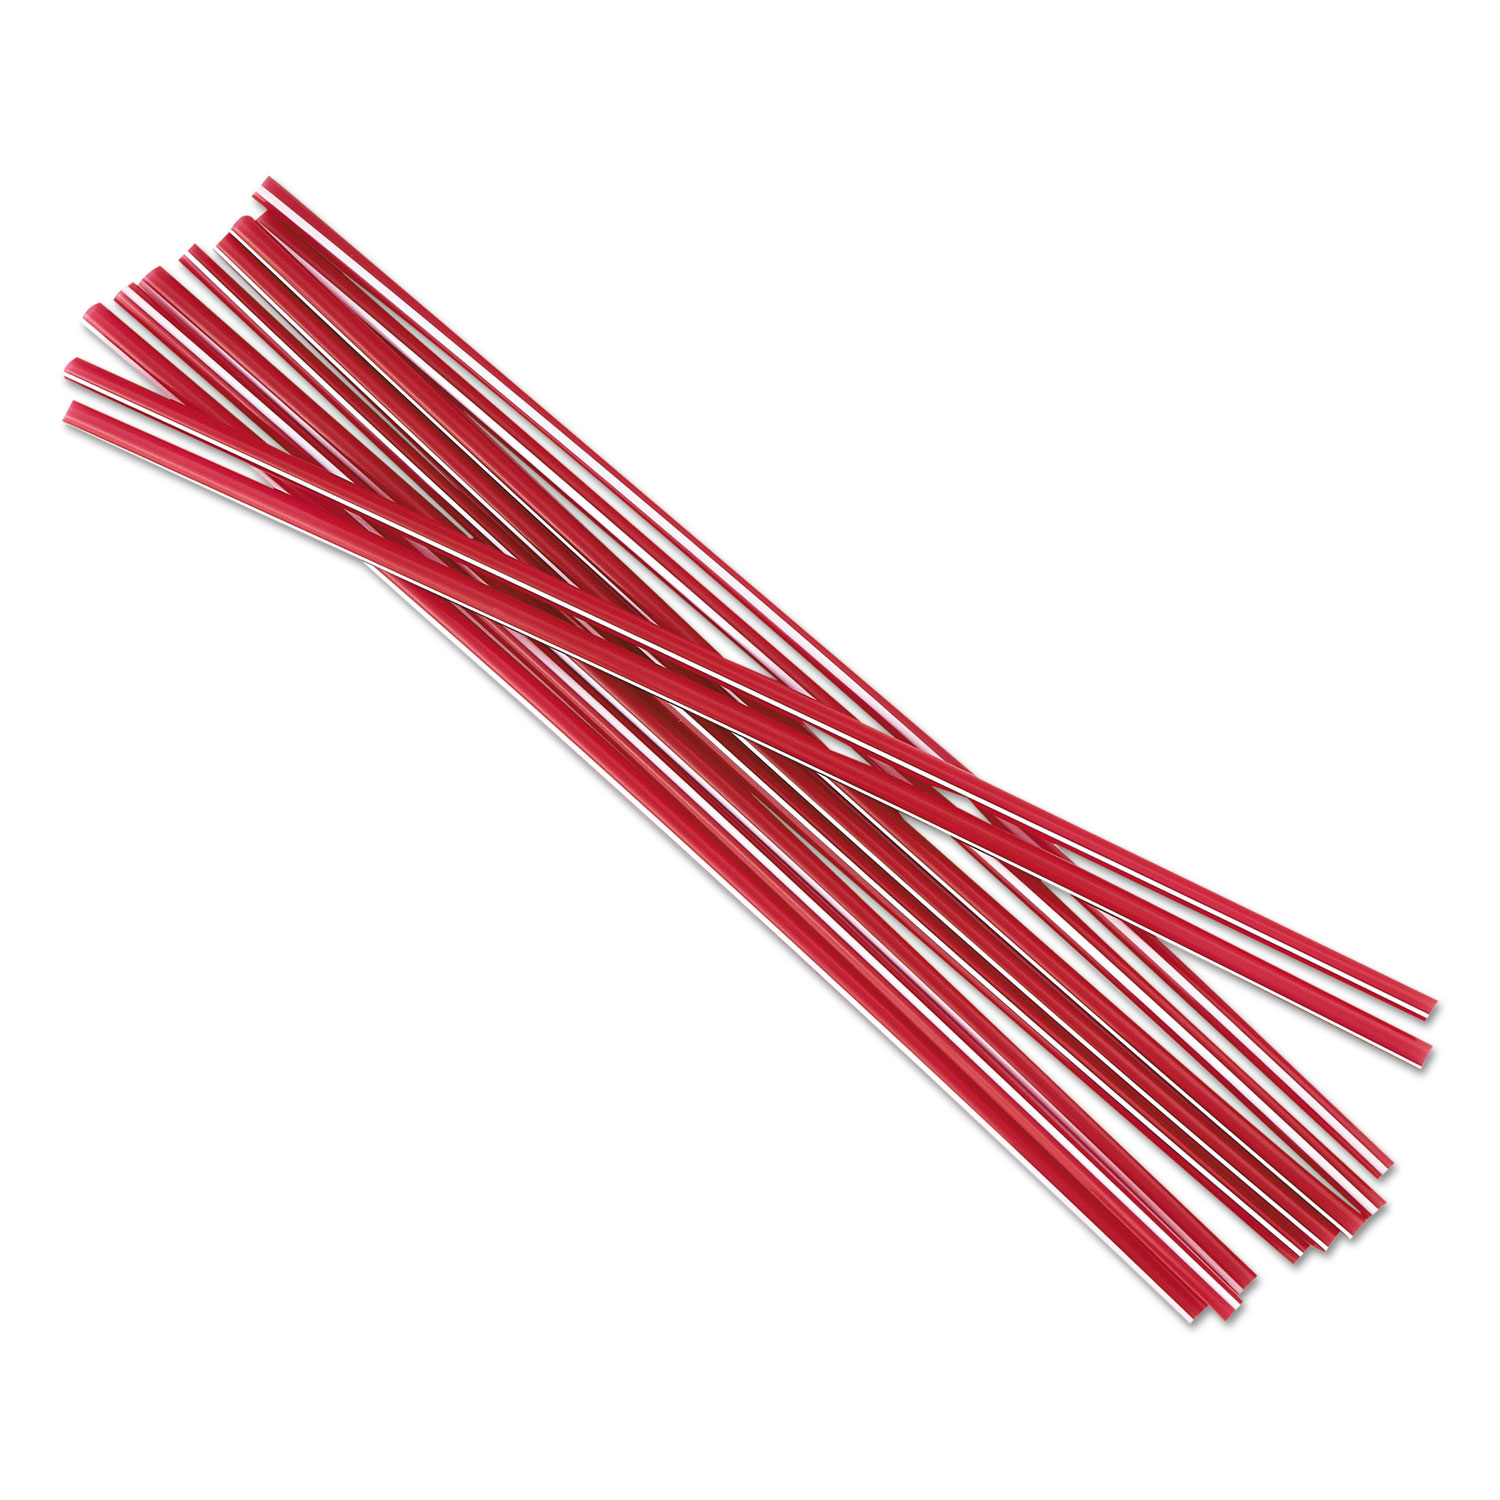 Unwrapped Cocktail Straws, 8, Plastic, Red w/White Stripe, 500/Pack, 10/Carton